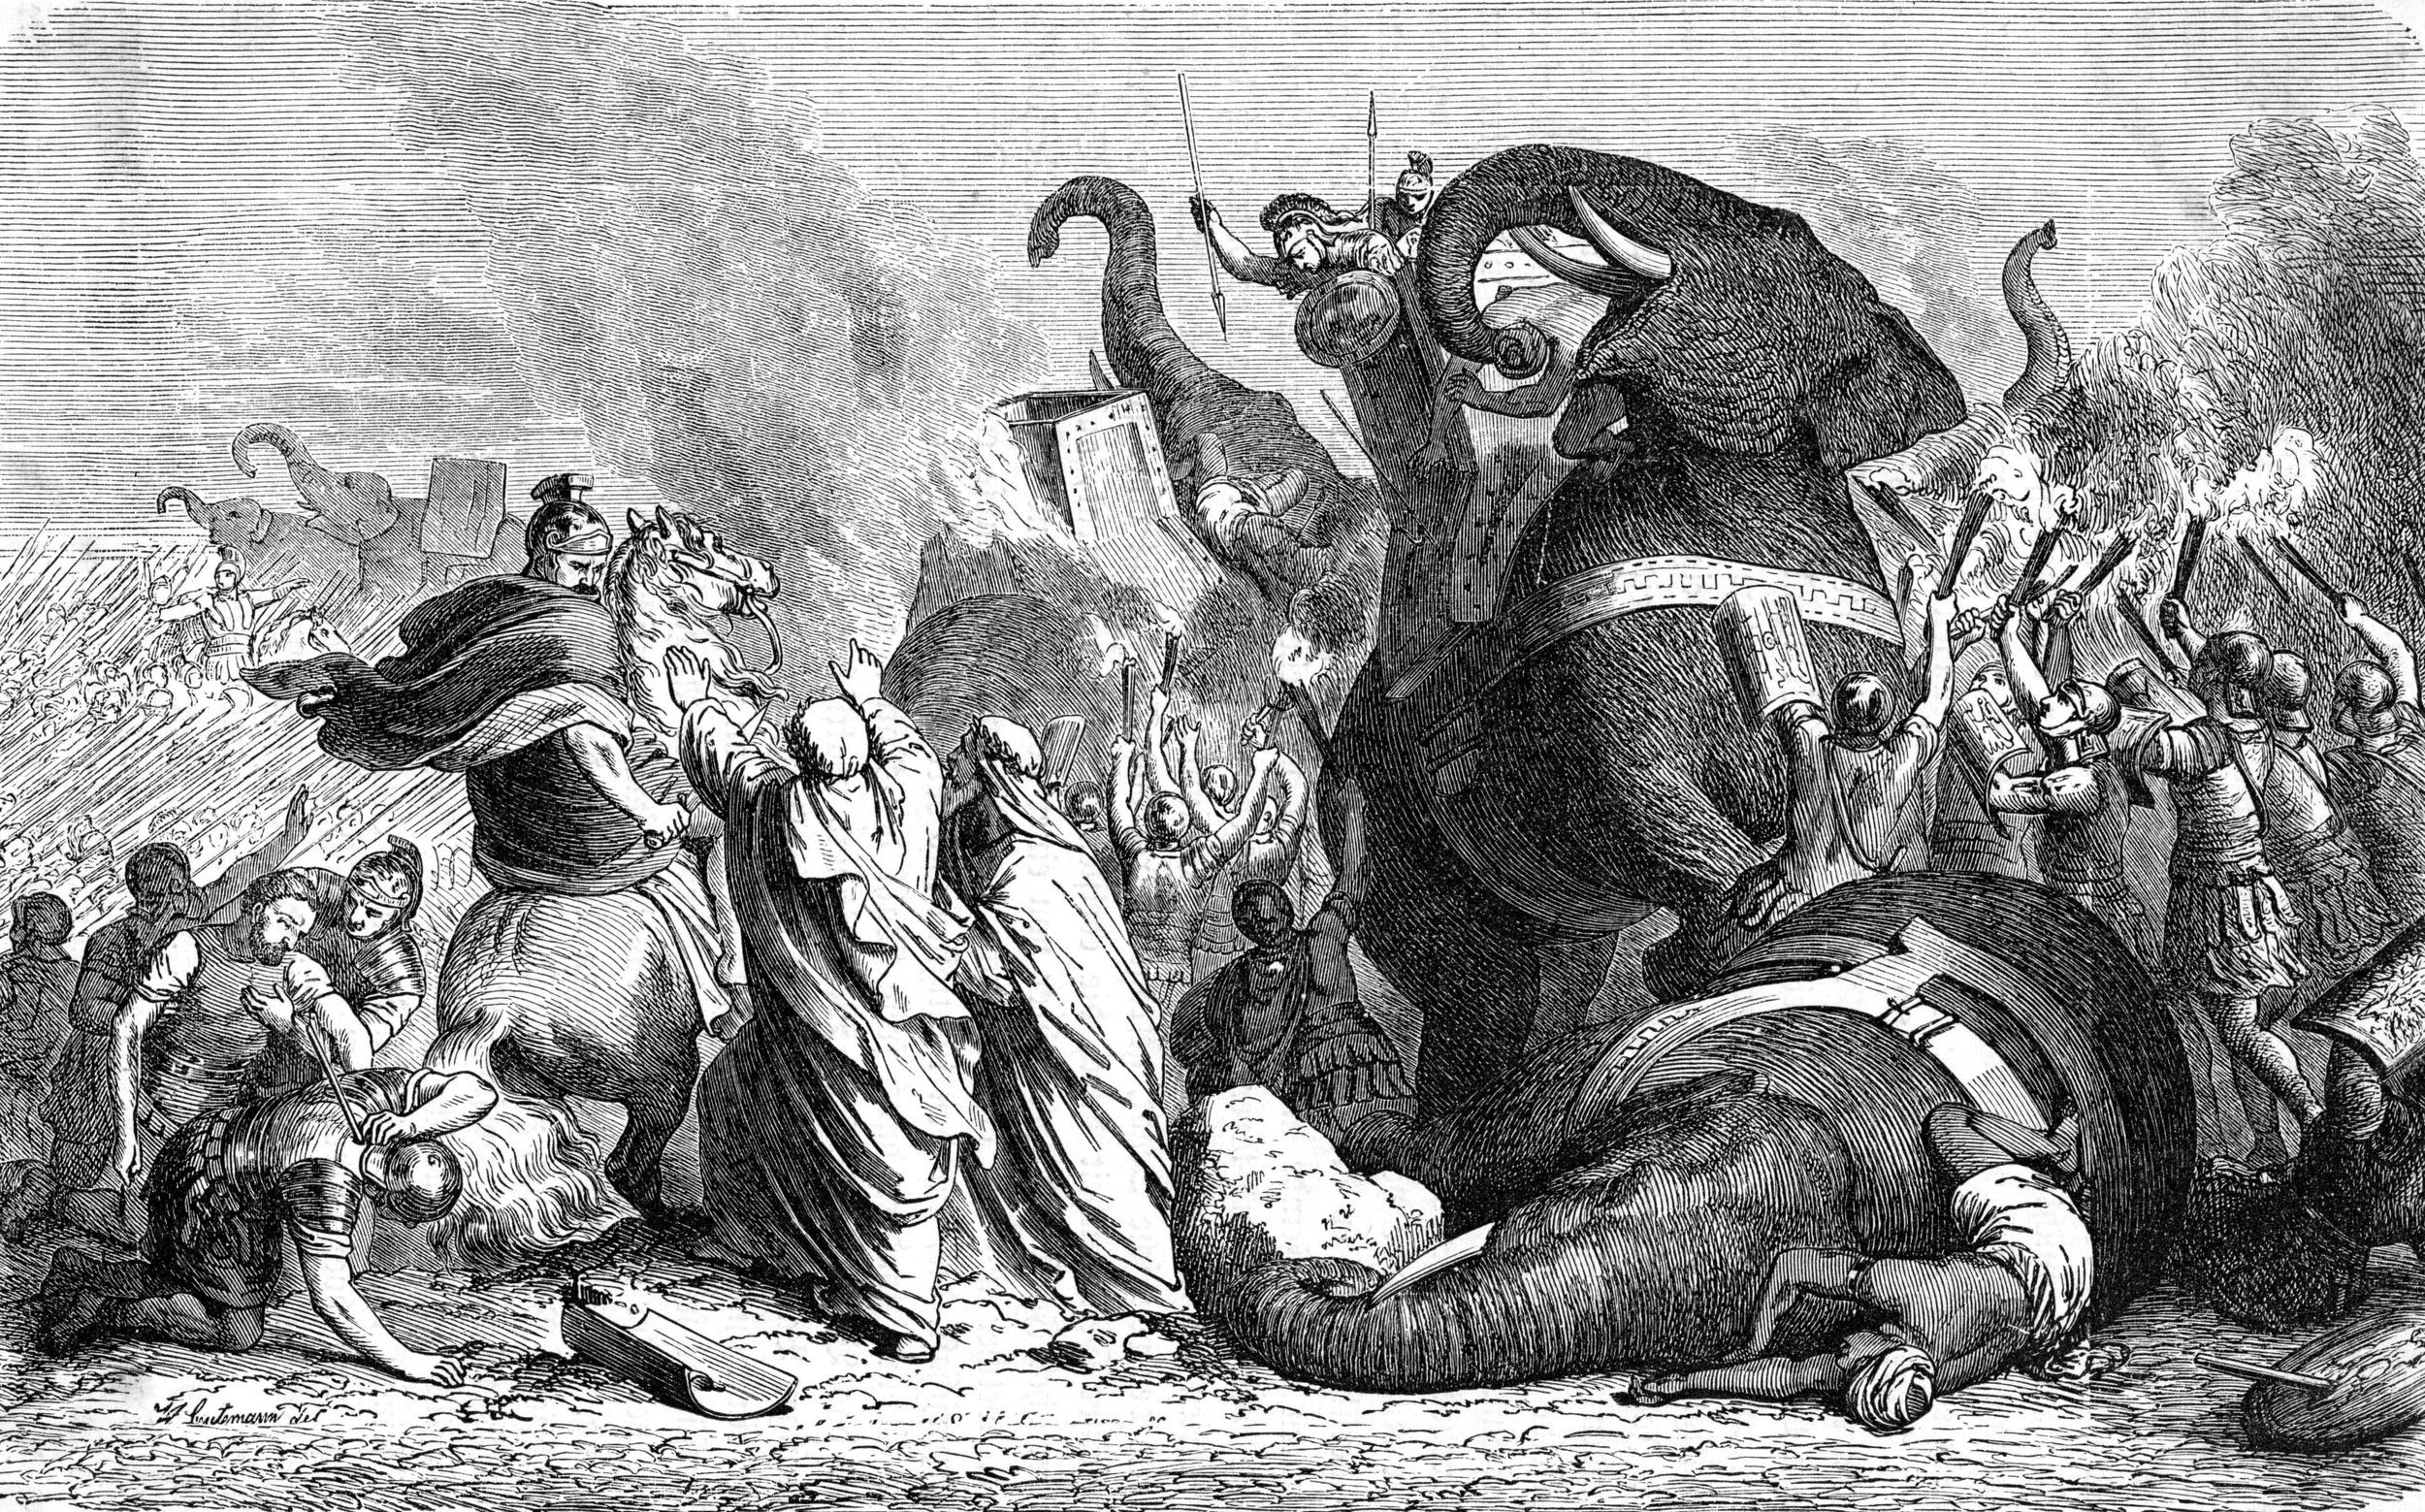 Pyrrhus’s mighty elephants struck terror into the hearts of hardened Roman infantry and cavalry, often turning the tide of the battle.